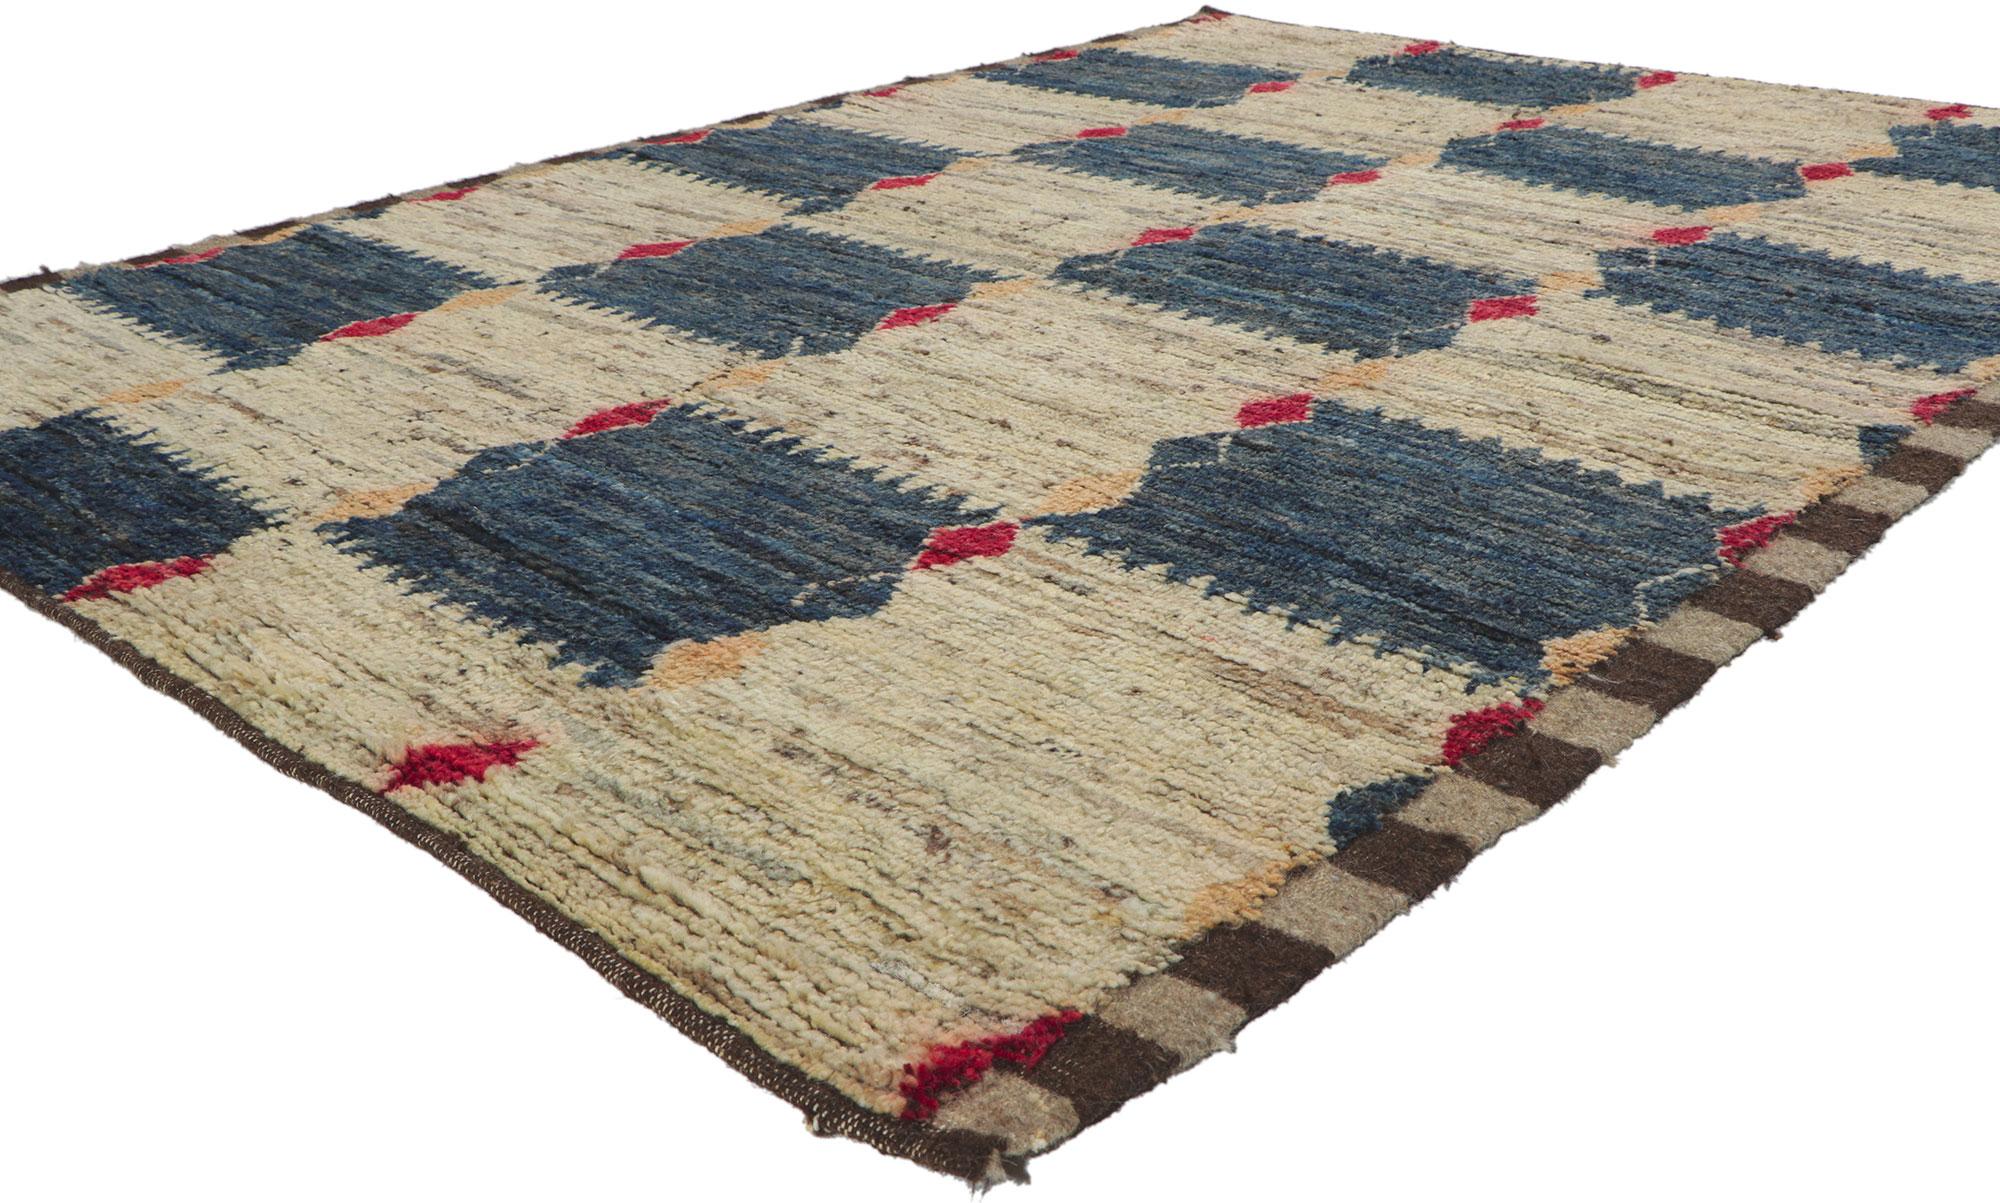 80822 Modern Checkered Moroccan Rug, 05'10 x 07'09.
Midcentury Modern meets tribal enchantment in this hand knotted wool Moroccan style rug. The checkerboard pattern and earthy color scheme woven into this piece reflect a simple yet straightforward